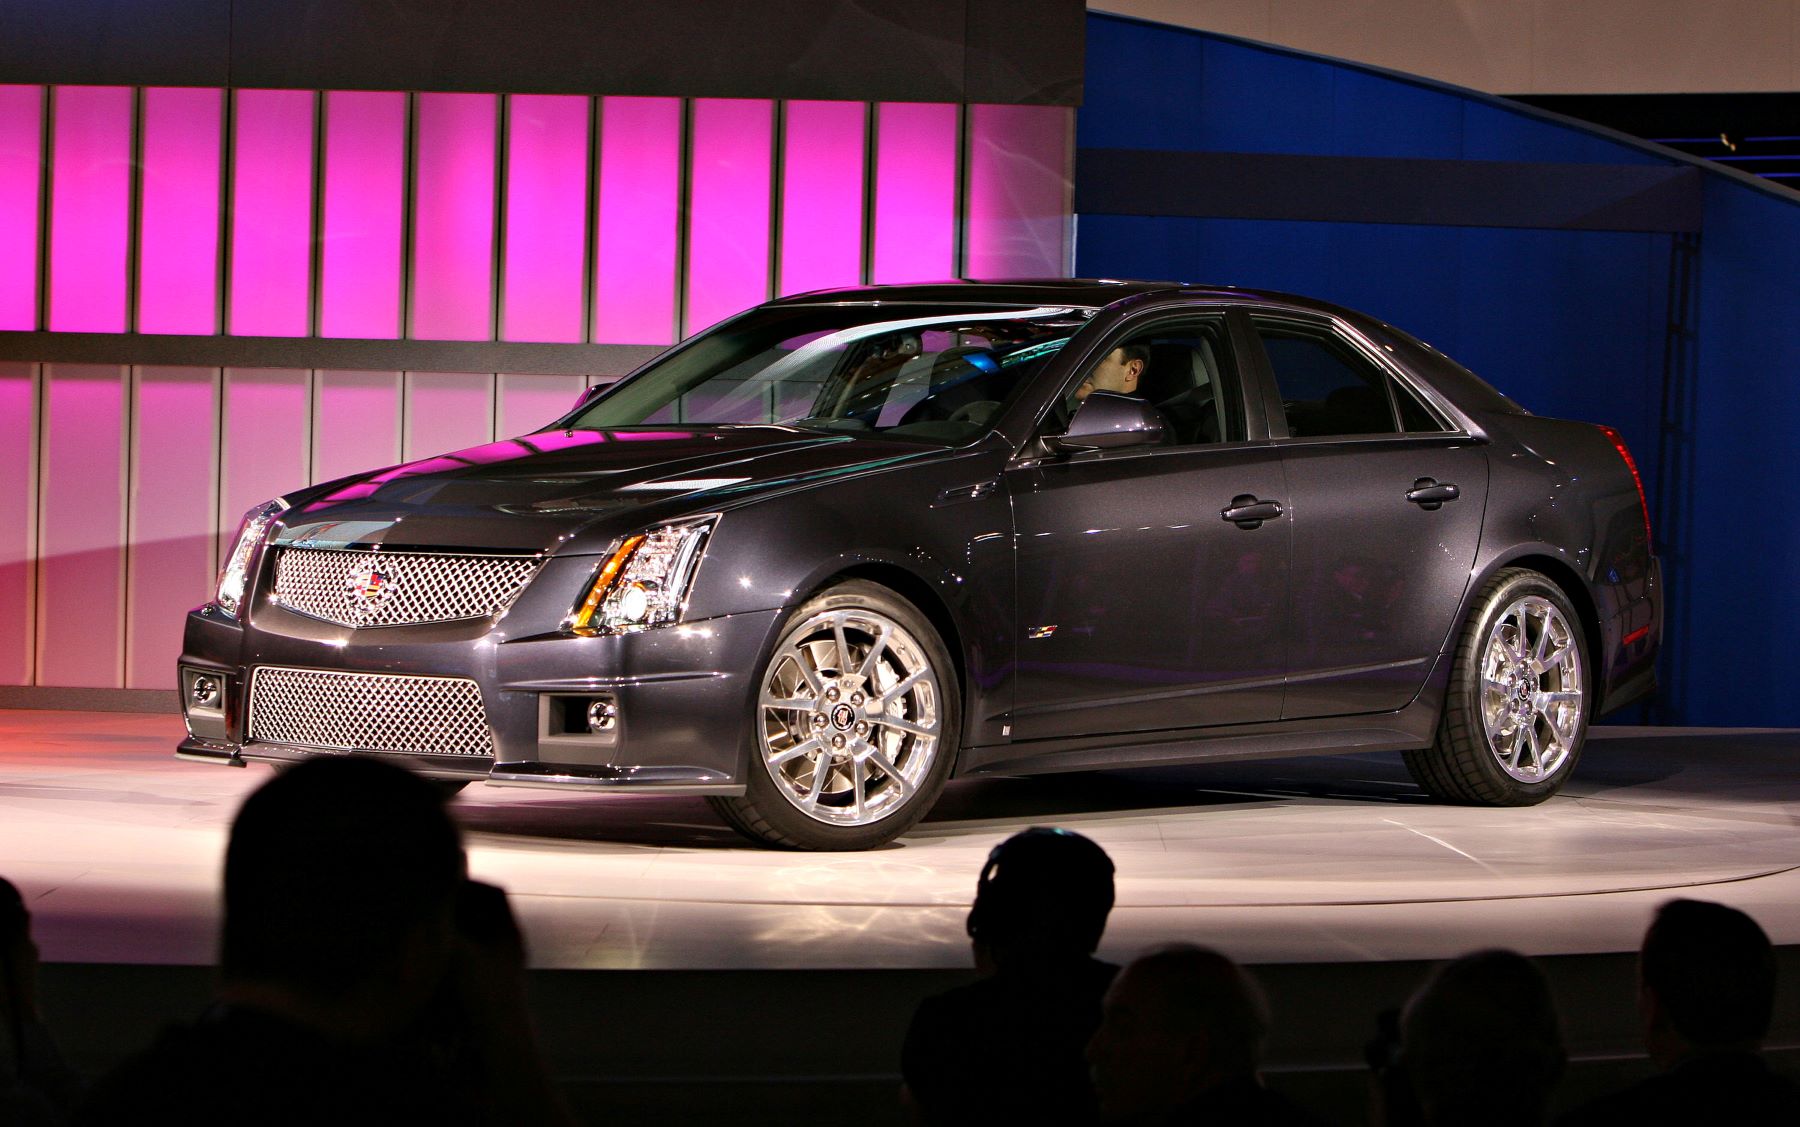 A 2009 Cadillac CTS-V luxury sedan driven on stage at the 2008 North American International Auto Show. This is one of the Cadillac CTS model years to avoid as a not reliable luxury car